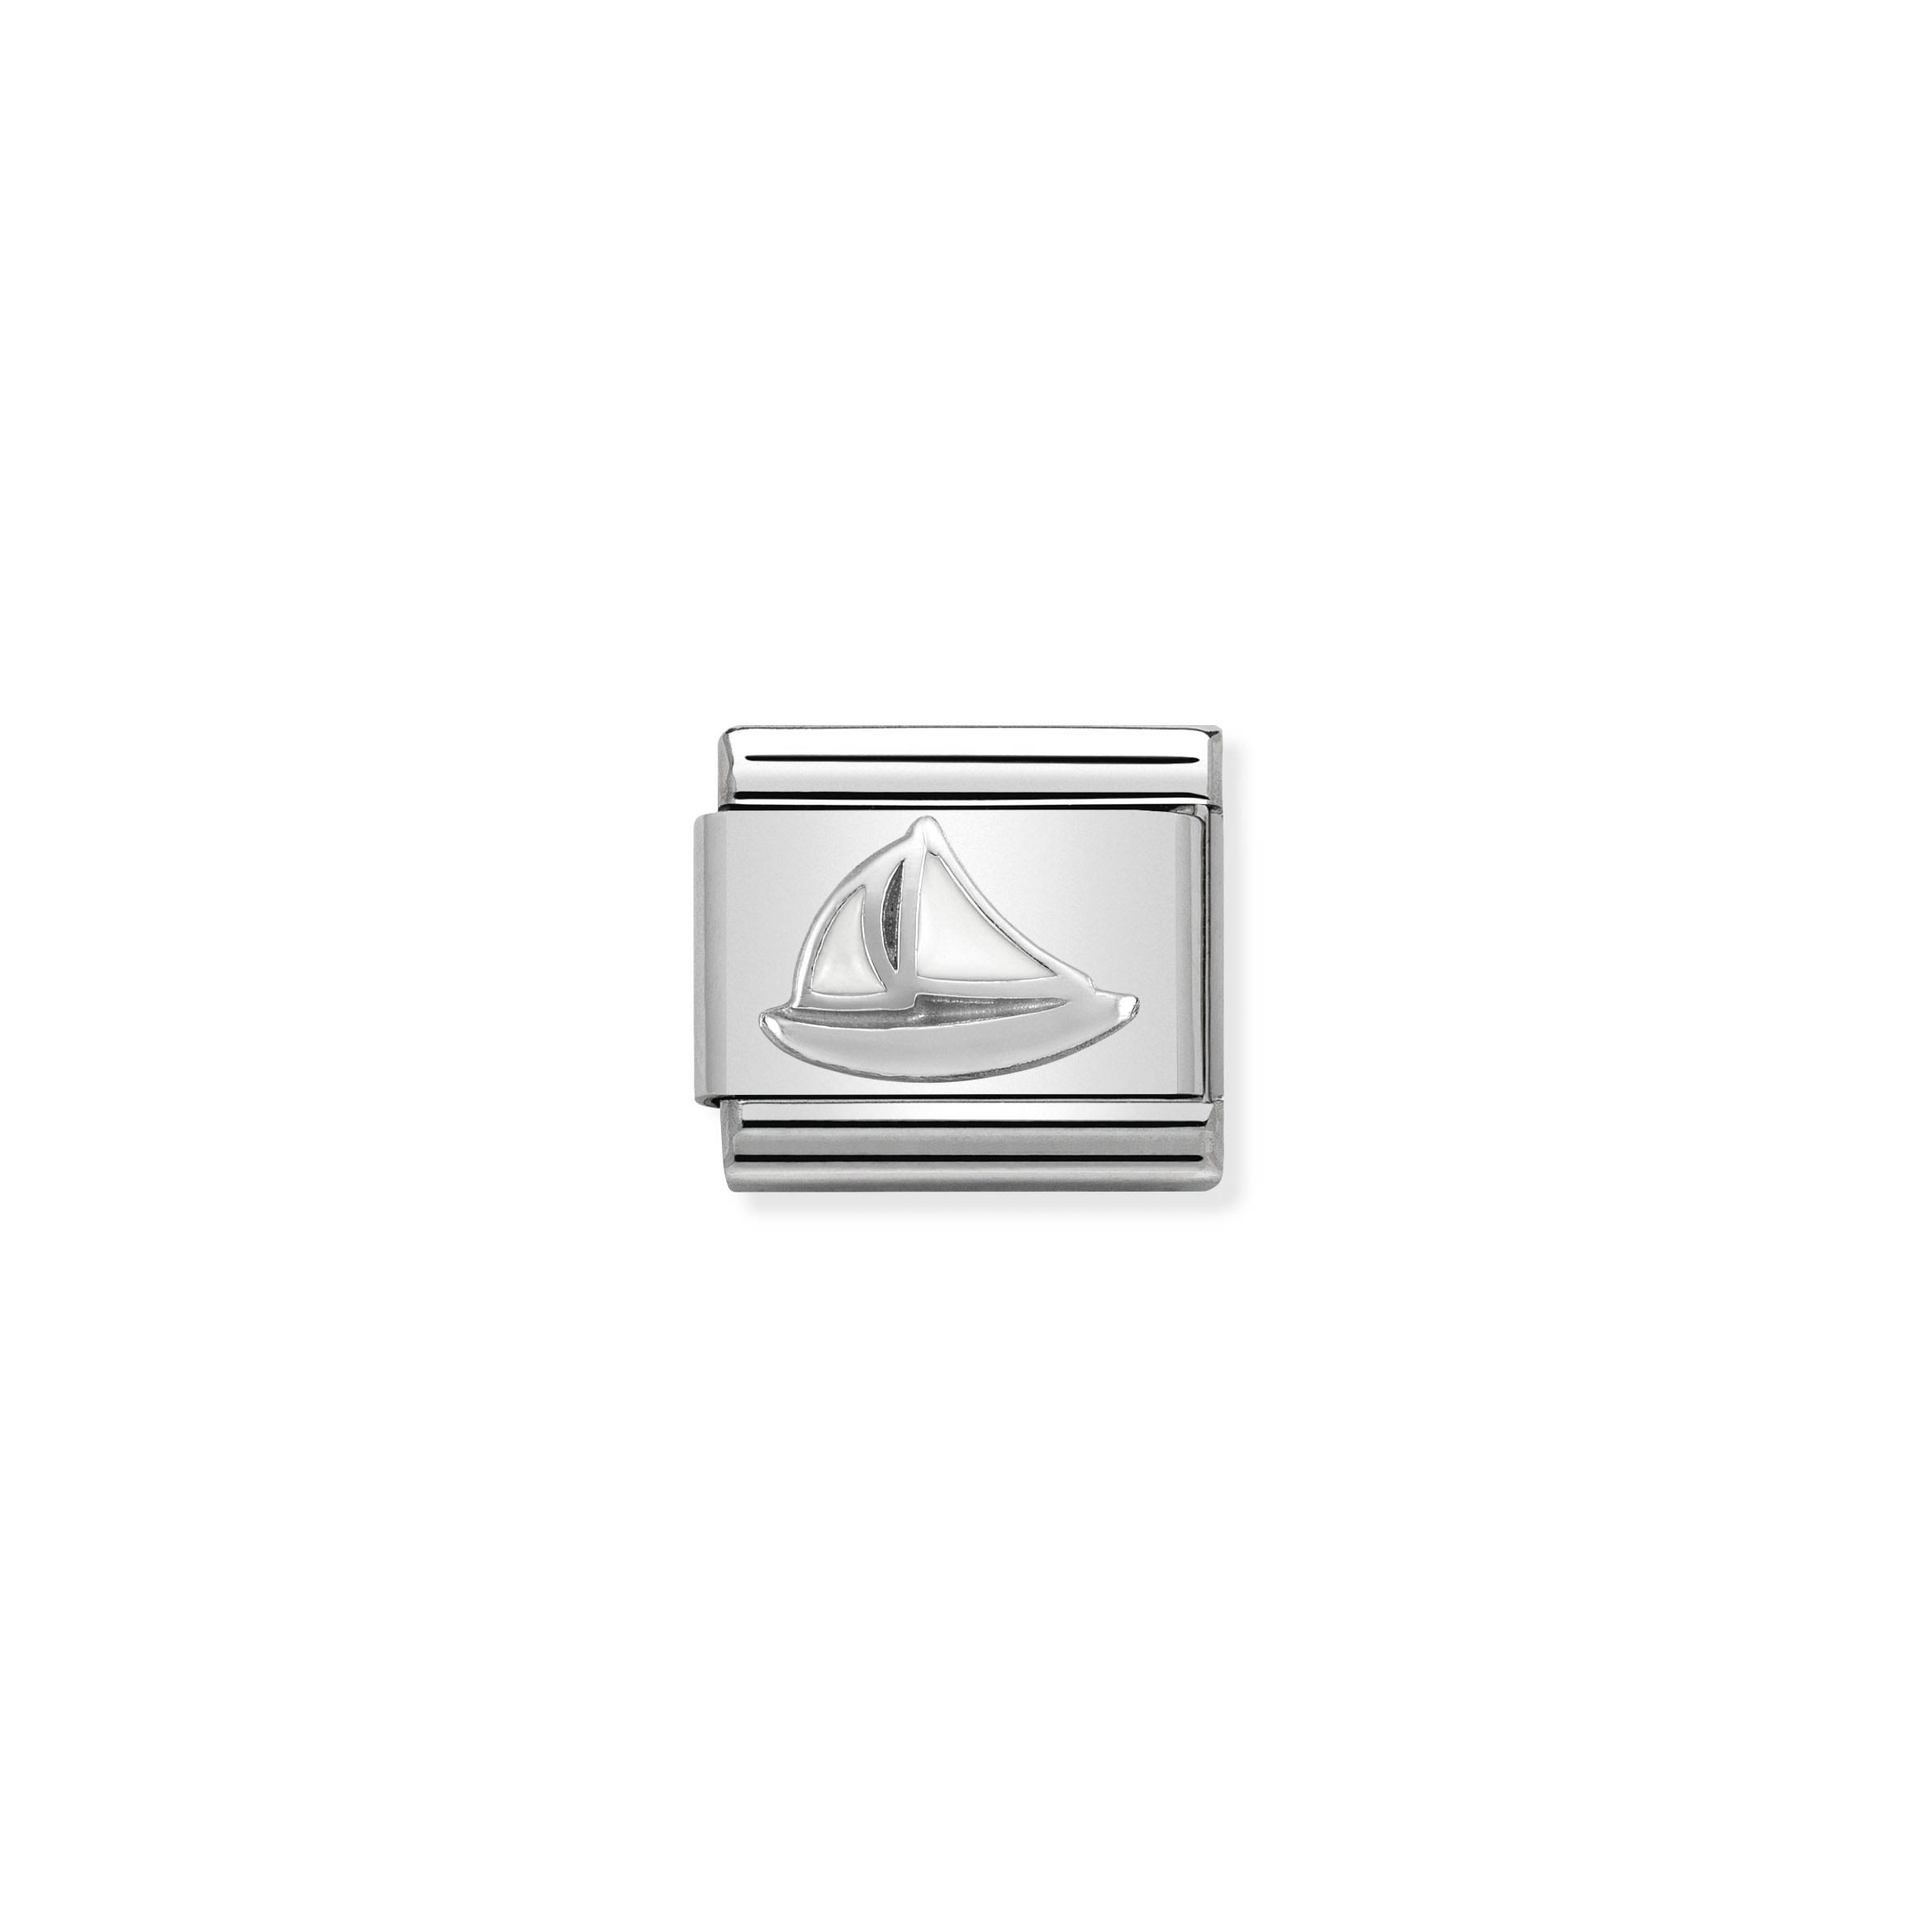 Nomination Composable Classic Sailboat Charm - Enamel and Sterling Silver